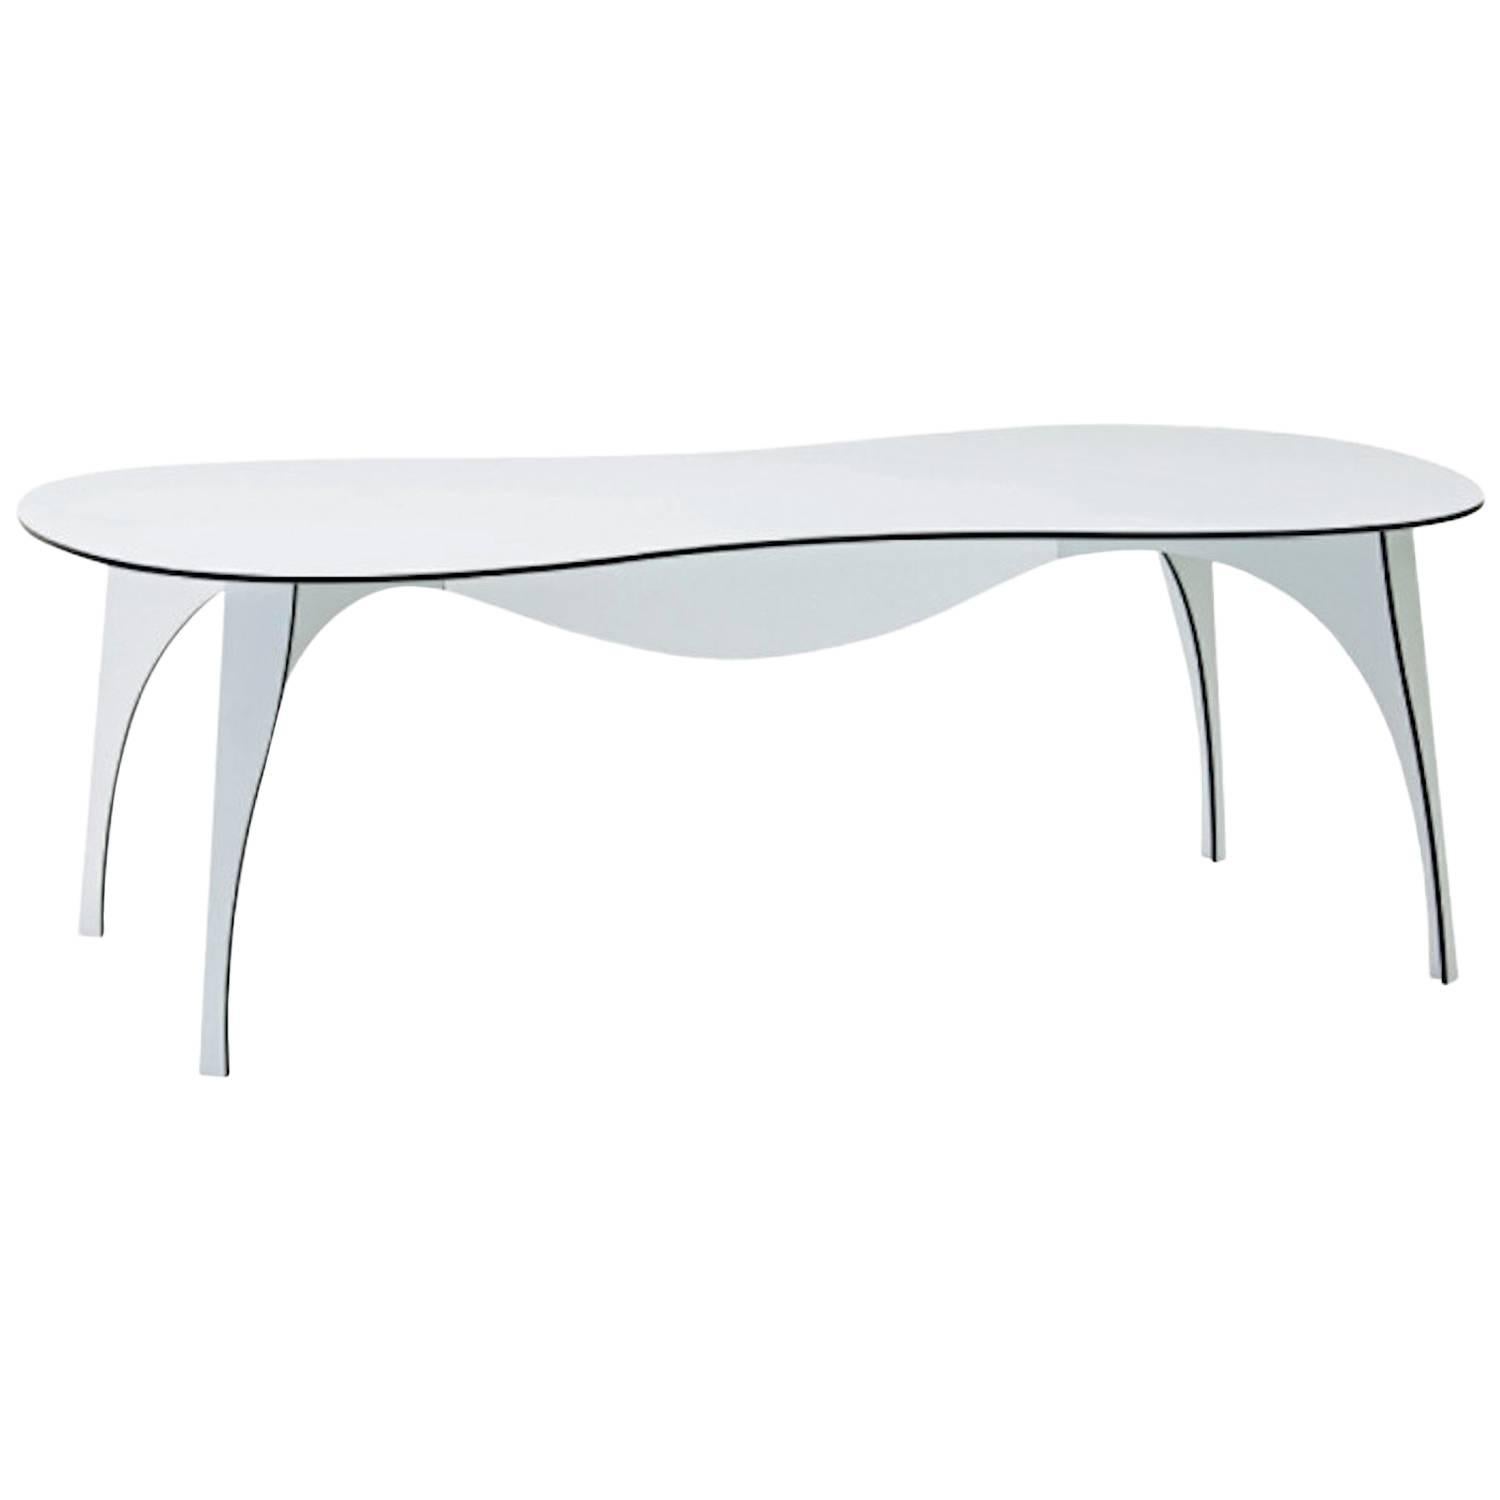 No Waste Dining Table in Aluminum by Ron Arad for Moroso Indoor/Outdoor Use For Sale